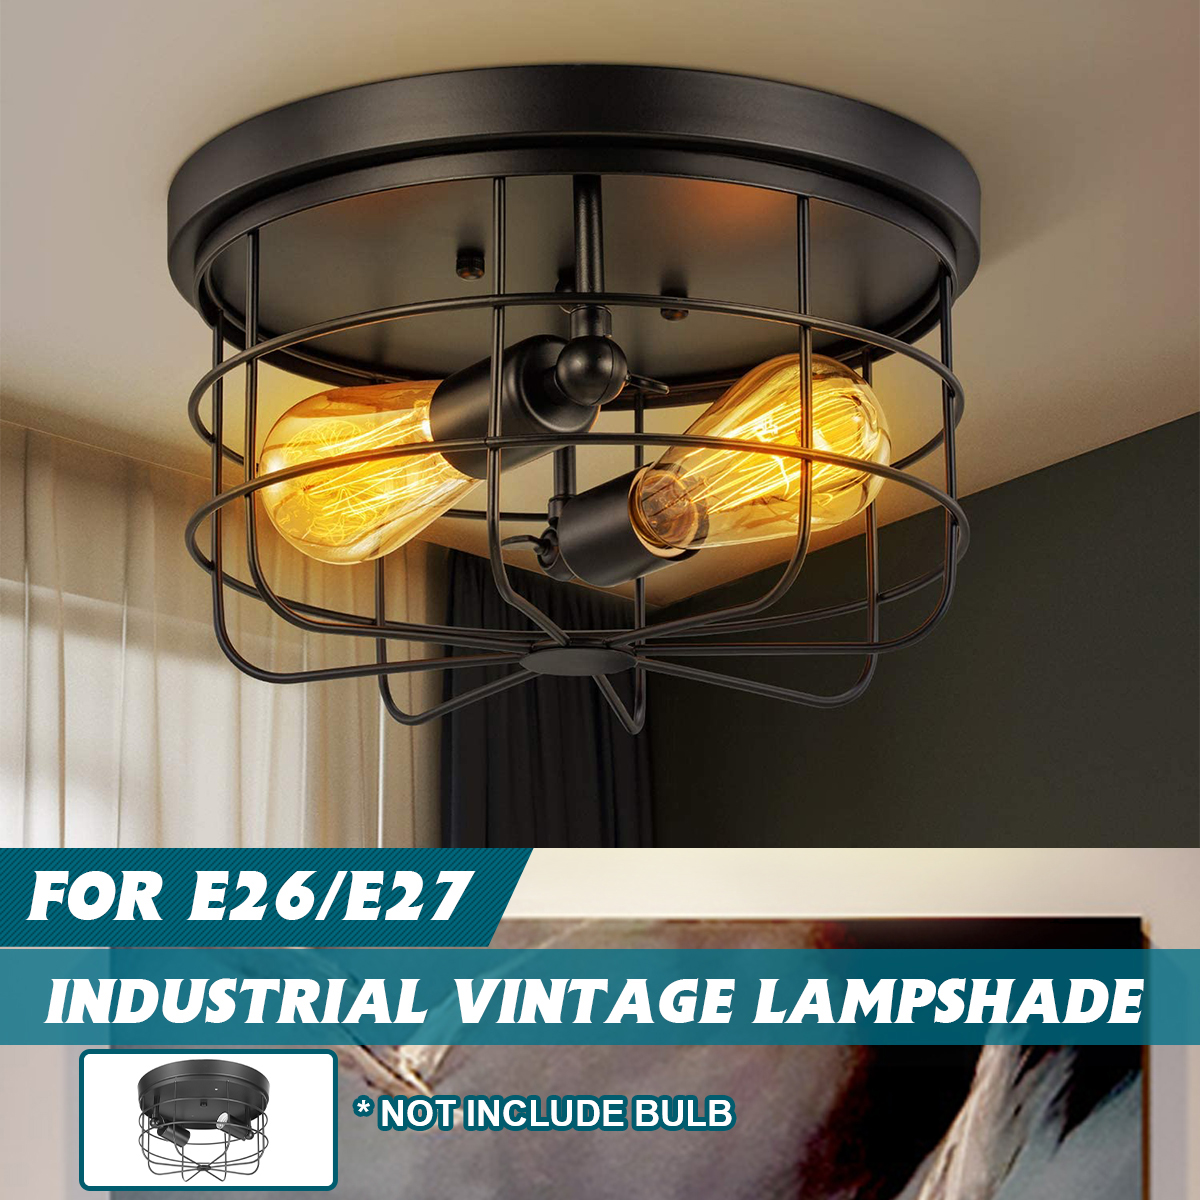 E26E27-Industrial-Vintage-Metal-Round-Pendant-Lamp-Semi-Flush-Mount-Ceiling-Light-Shade-Without-Bulb-1839326-1